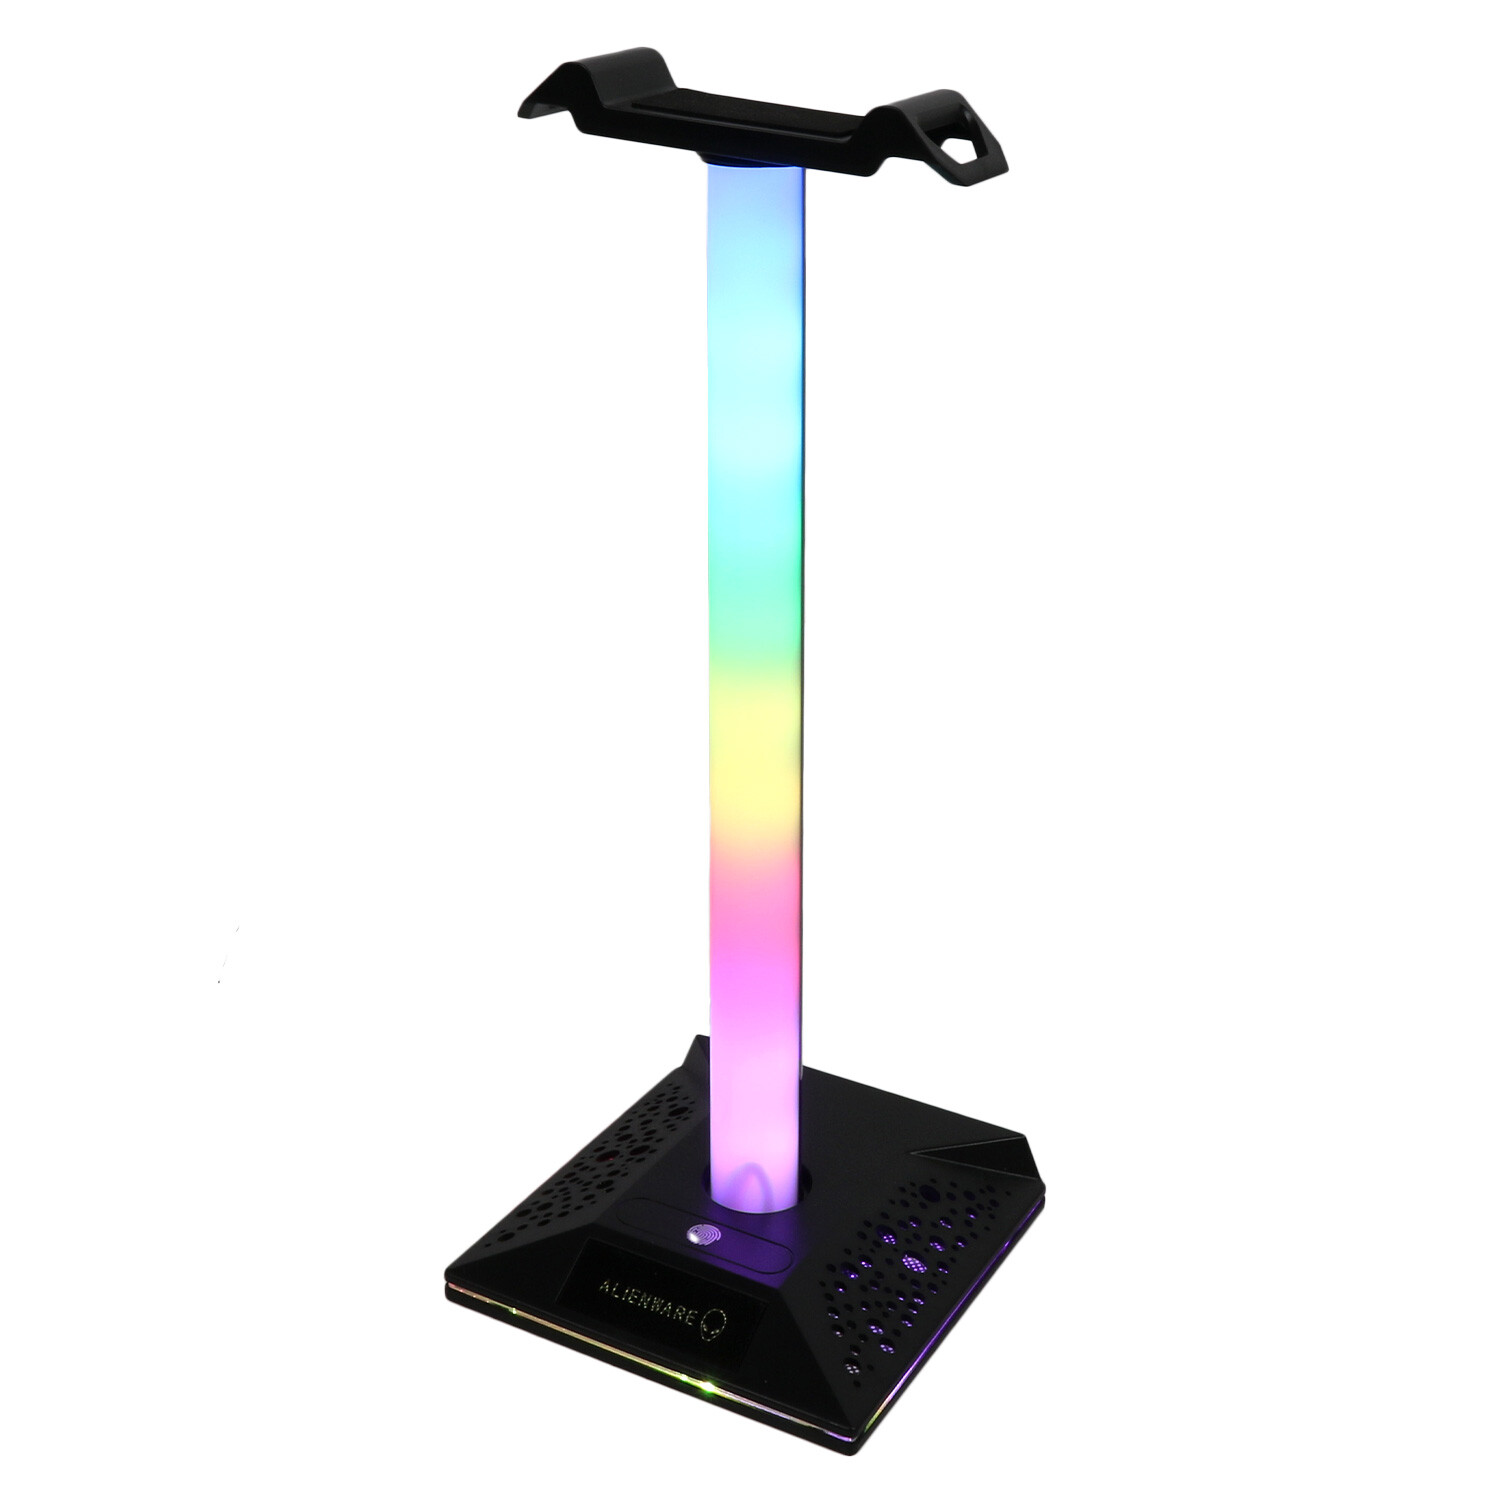 Gaming Headset and Stand Set - Black Image 1